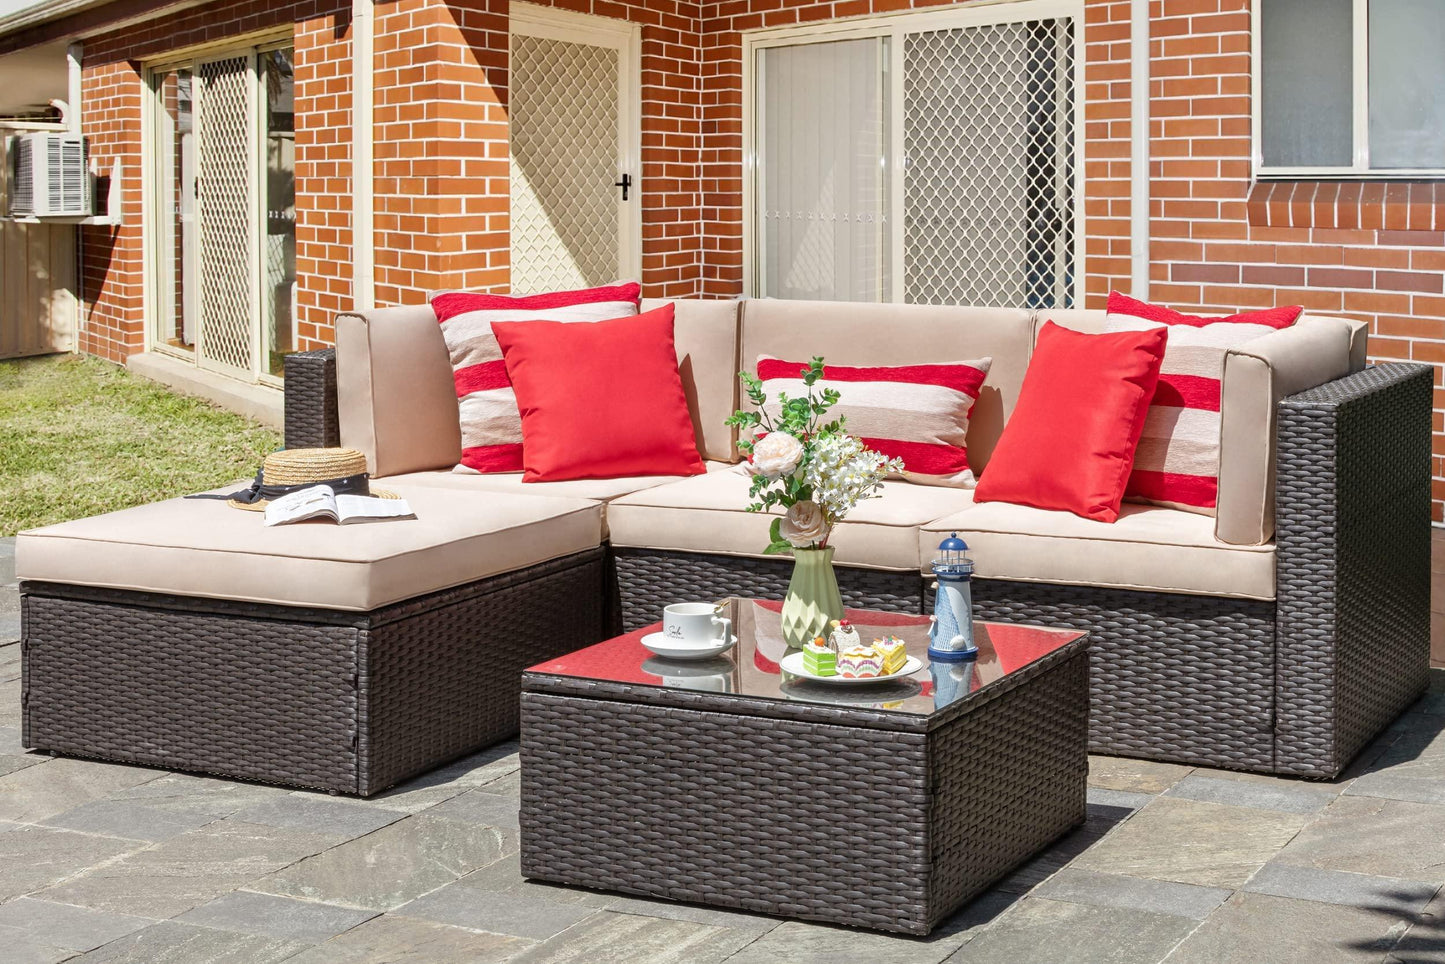 Vongrasig 5 Piece Patio Furniture Sets, All-Weather Brown PE Wicker Outdoor Couch Sectional Set, Small Conversation Set for Garden/Patio w/Ottoman, Glass Table, Red Pillow, Beige - CookCave